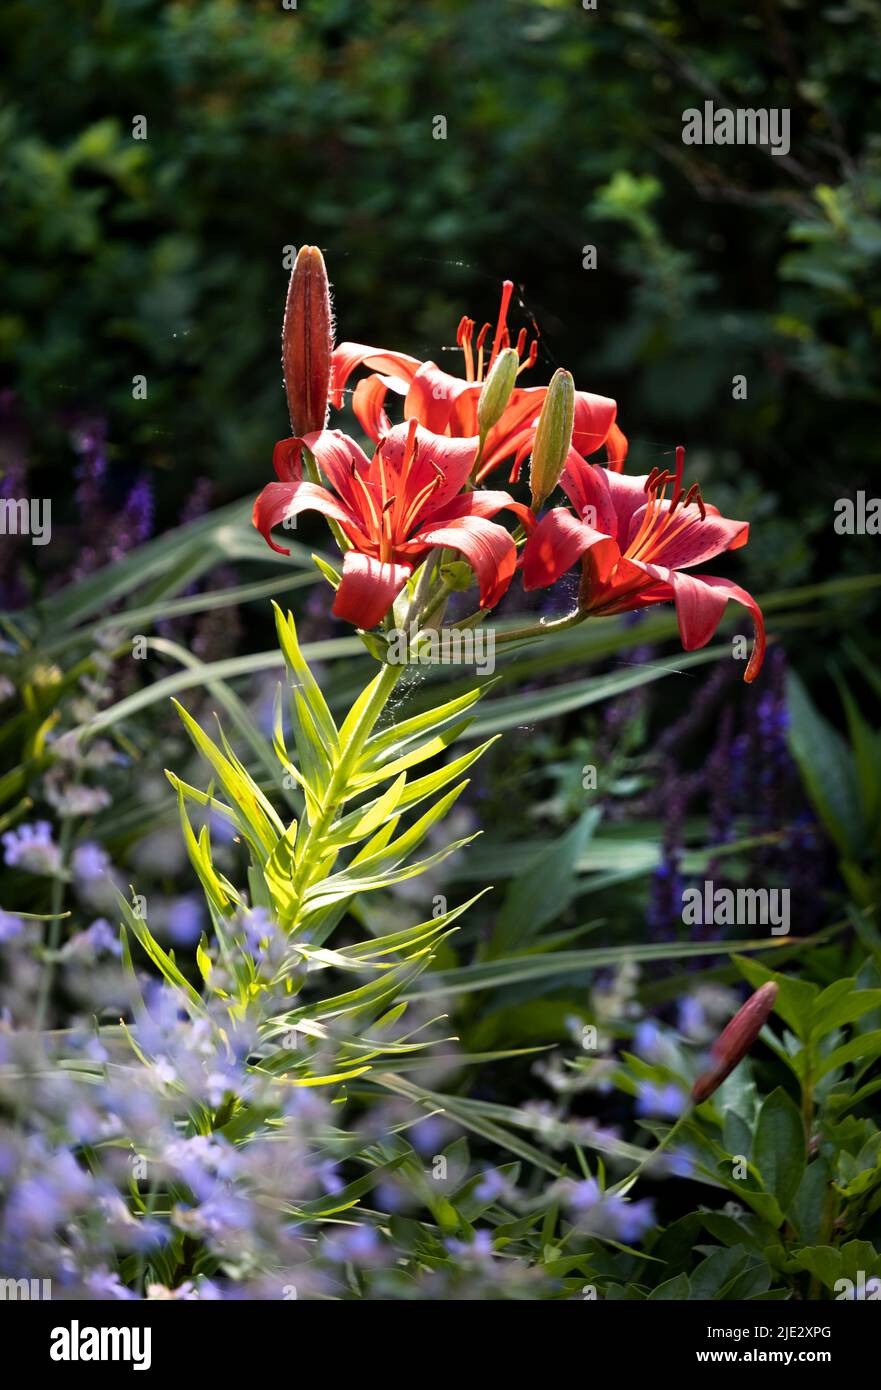 An orange day lily or tiger lily, Lilium lancifolium, shining in dappled sunlight on a blurred green background, spring, summer, Pennsylvania Stock Photo